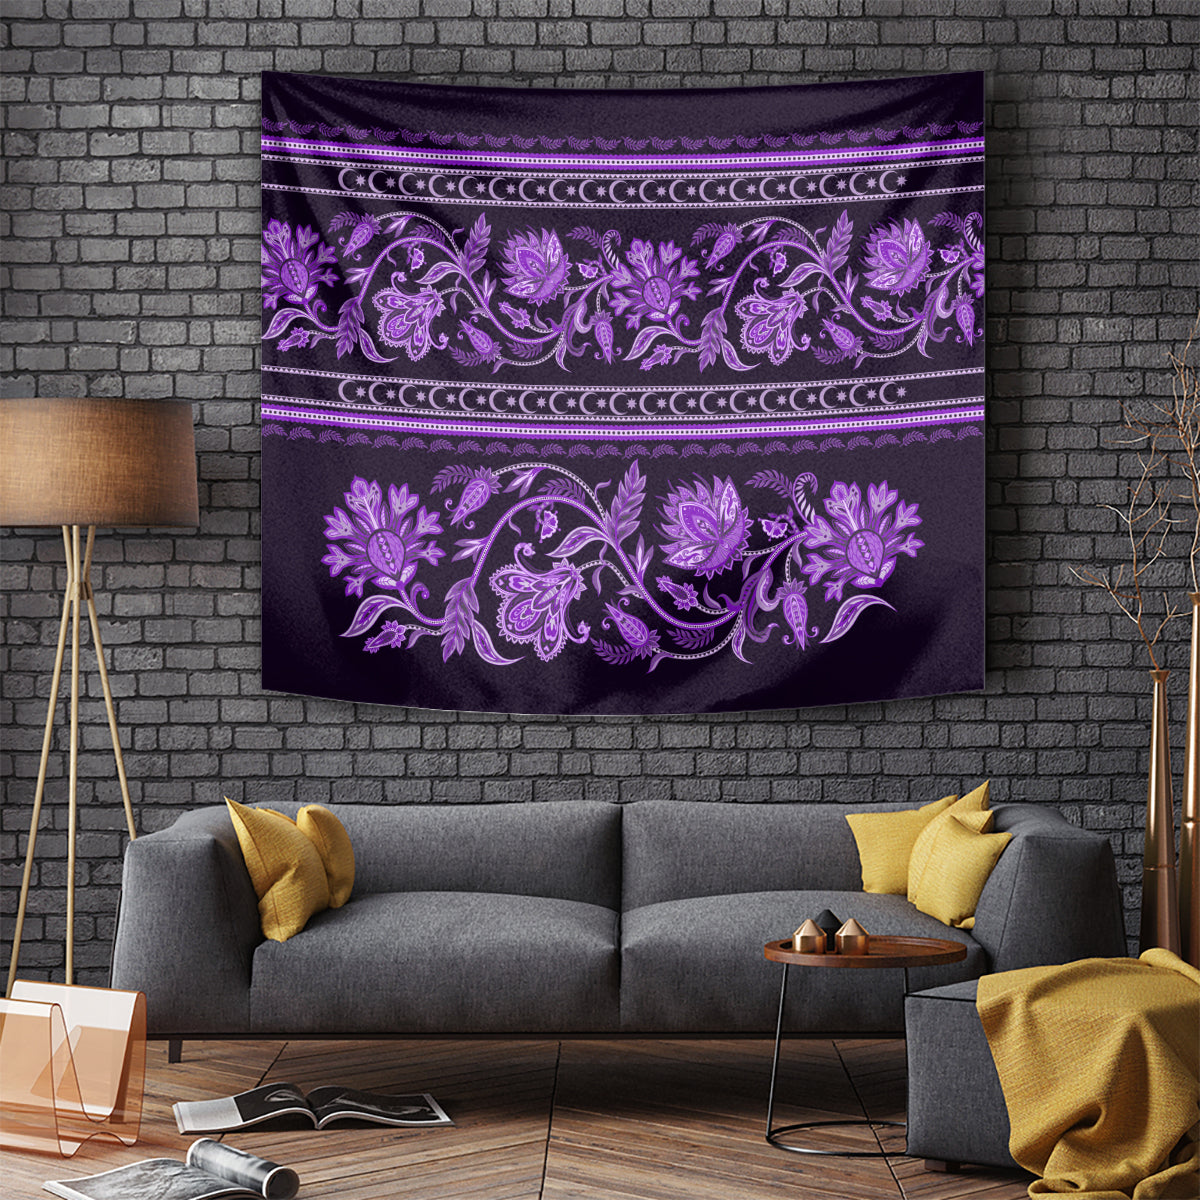 azerbaijan-tapestry-traditional-pattern-ornament-with-flowers-buta-violet